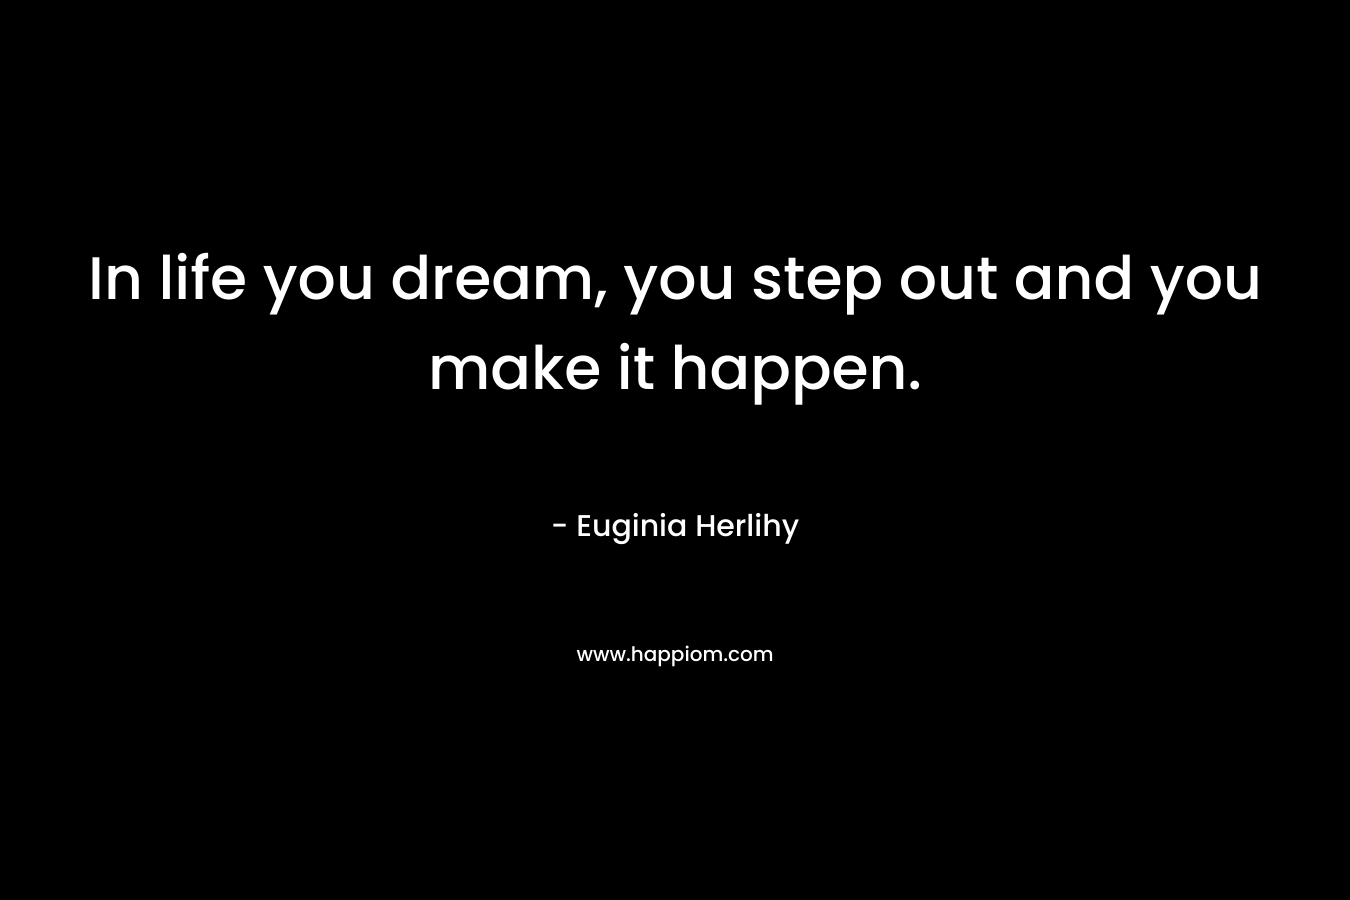 In life you dream, you step out and you make it happen.